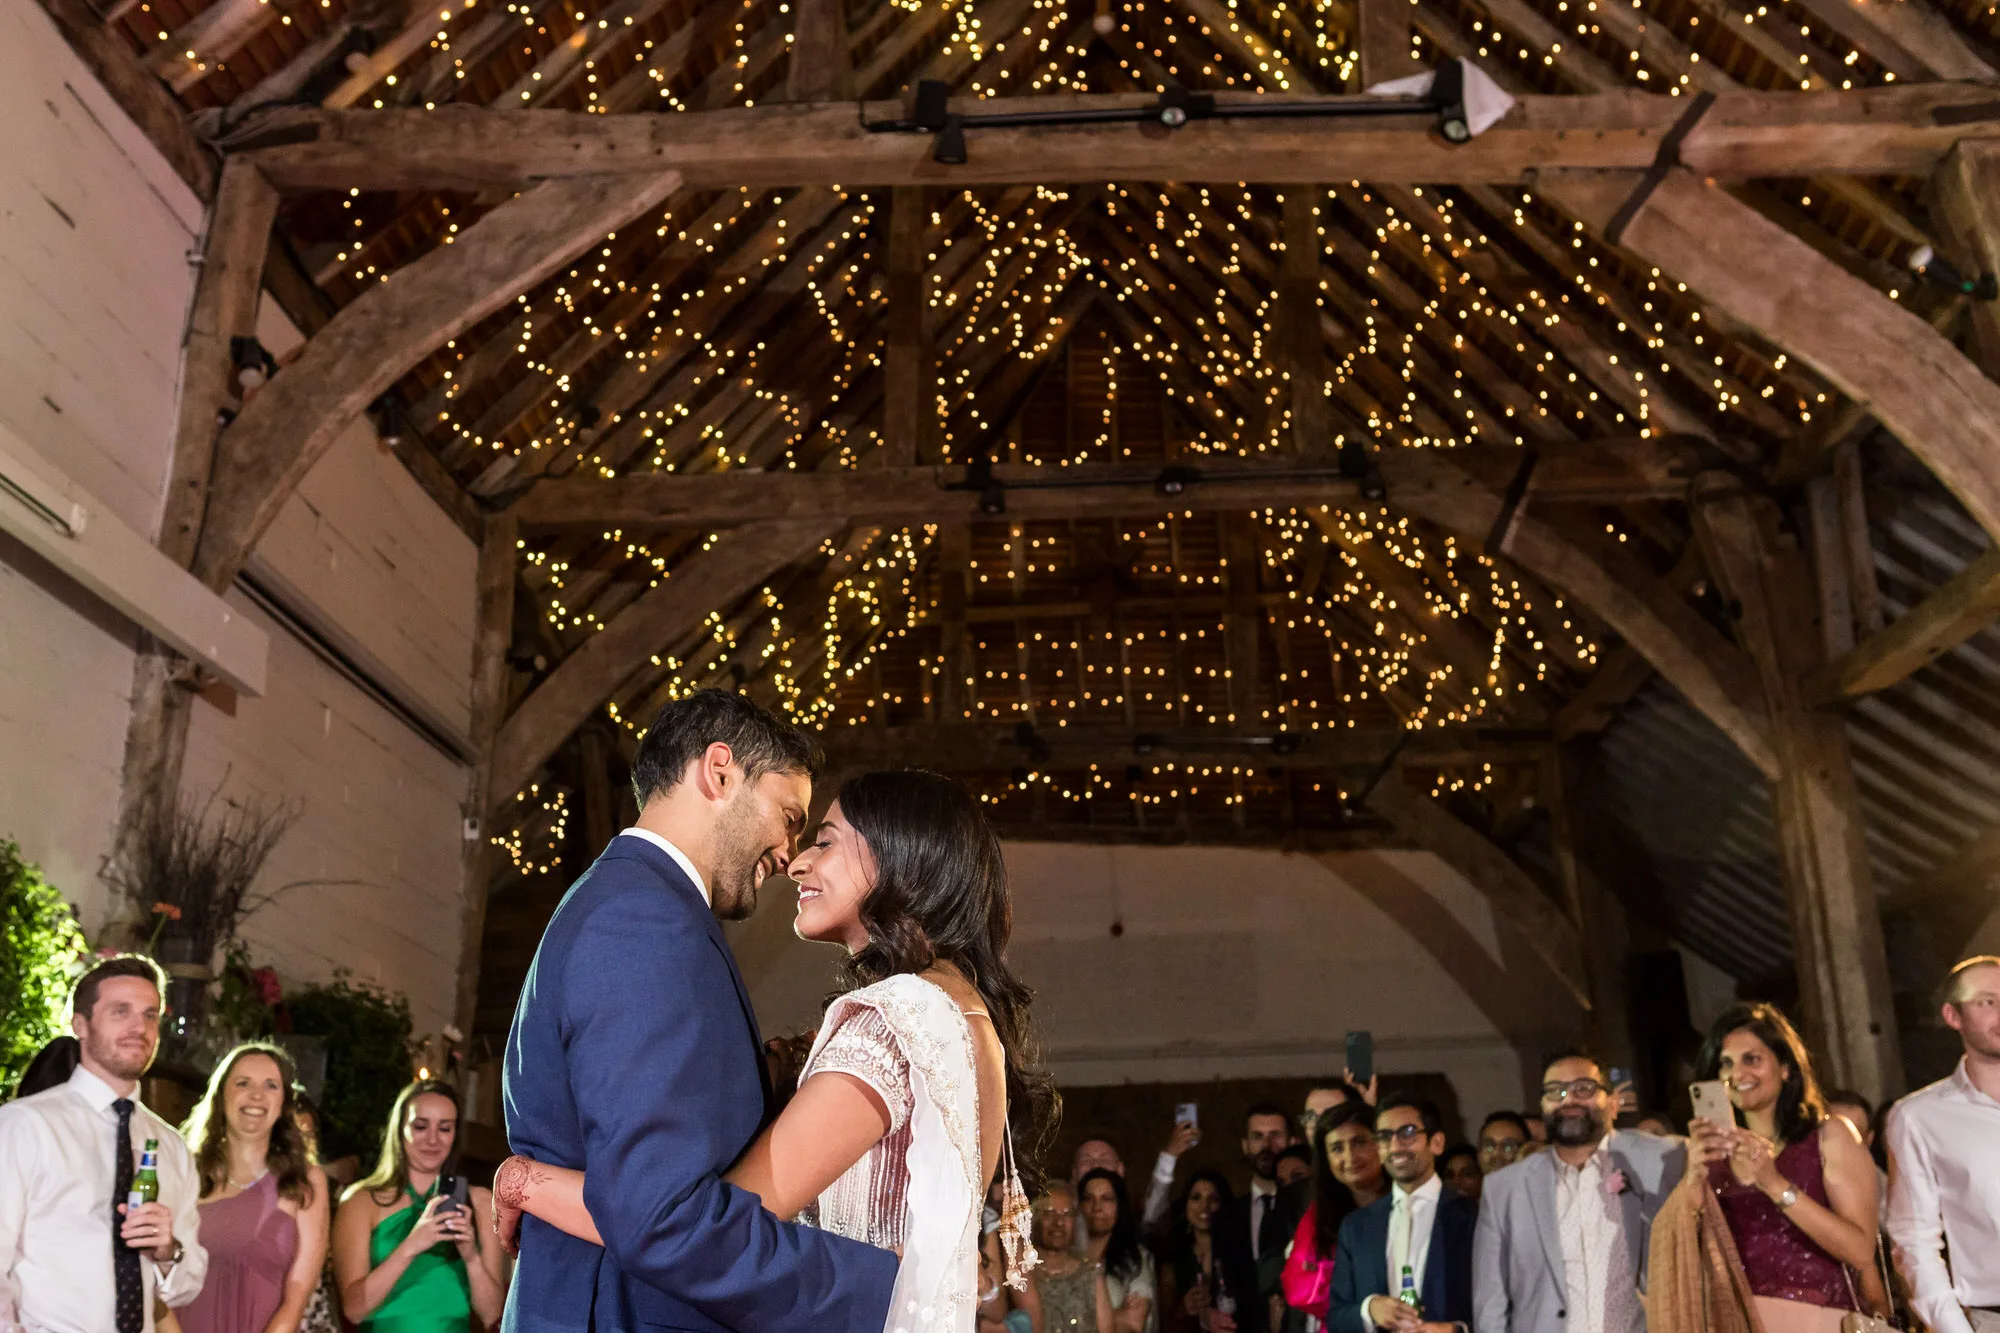 Reportage Wedding Photographer - a couple dance under a canopy of fairy lights at a barn wedding 